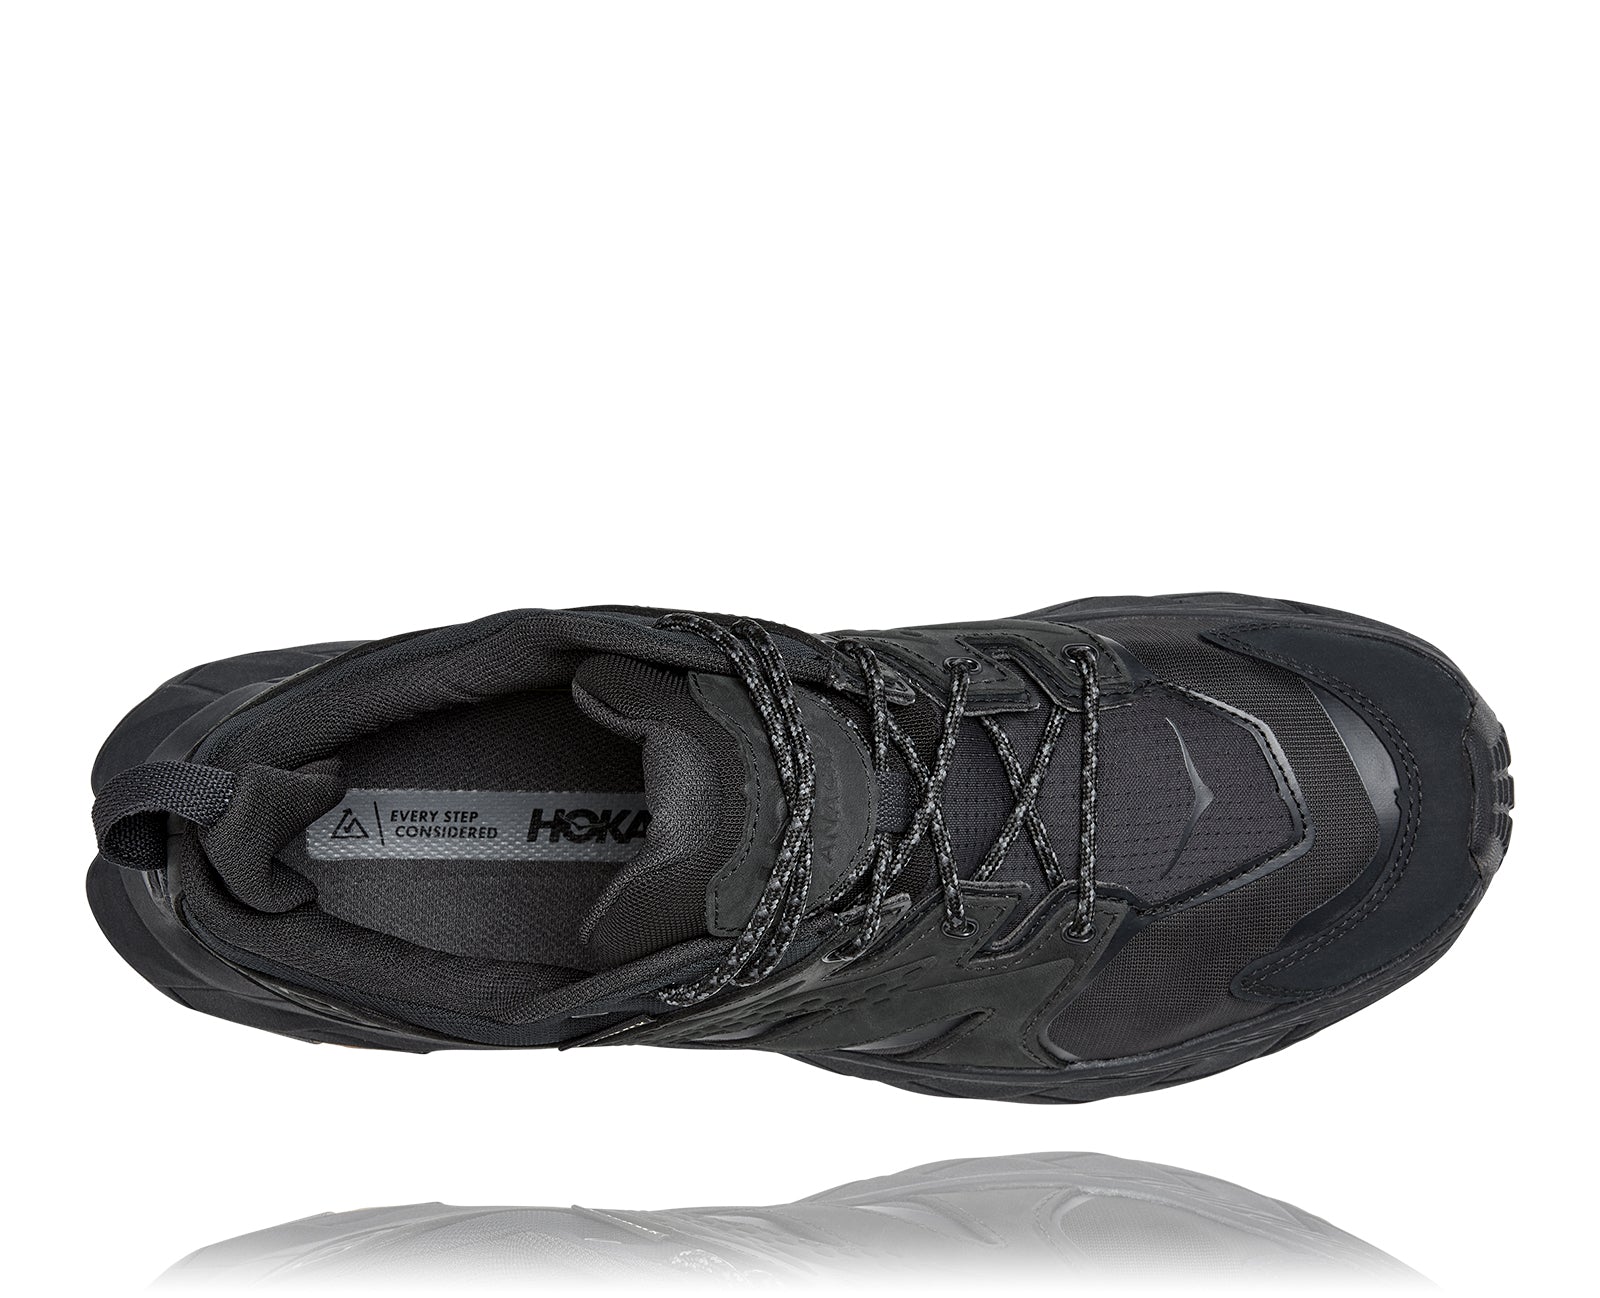 The Men's Anacapa Low GTX is the ideal low-profile hiking shoe.  It's built with all the same great features that has made Hoka famous.  In addition, a Gore-Tex upper with recycled fabric and a gusseted tongue has been added to keep your feet comfortable and safe from the elements.  The 5mm Vibram lugs on the outsole are enough to provide great traction wherever your legs can take you.